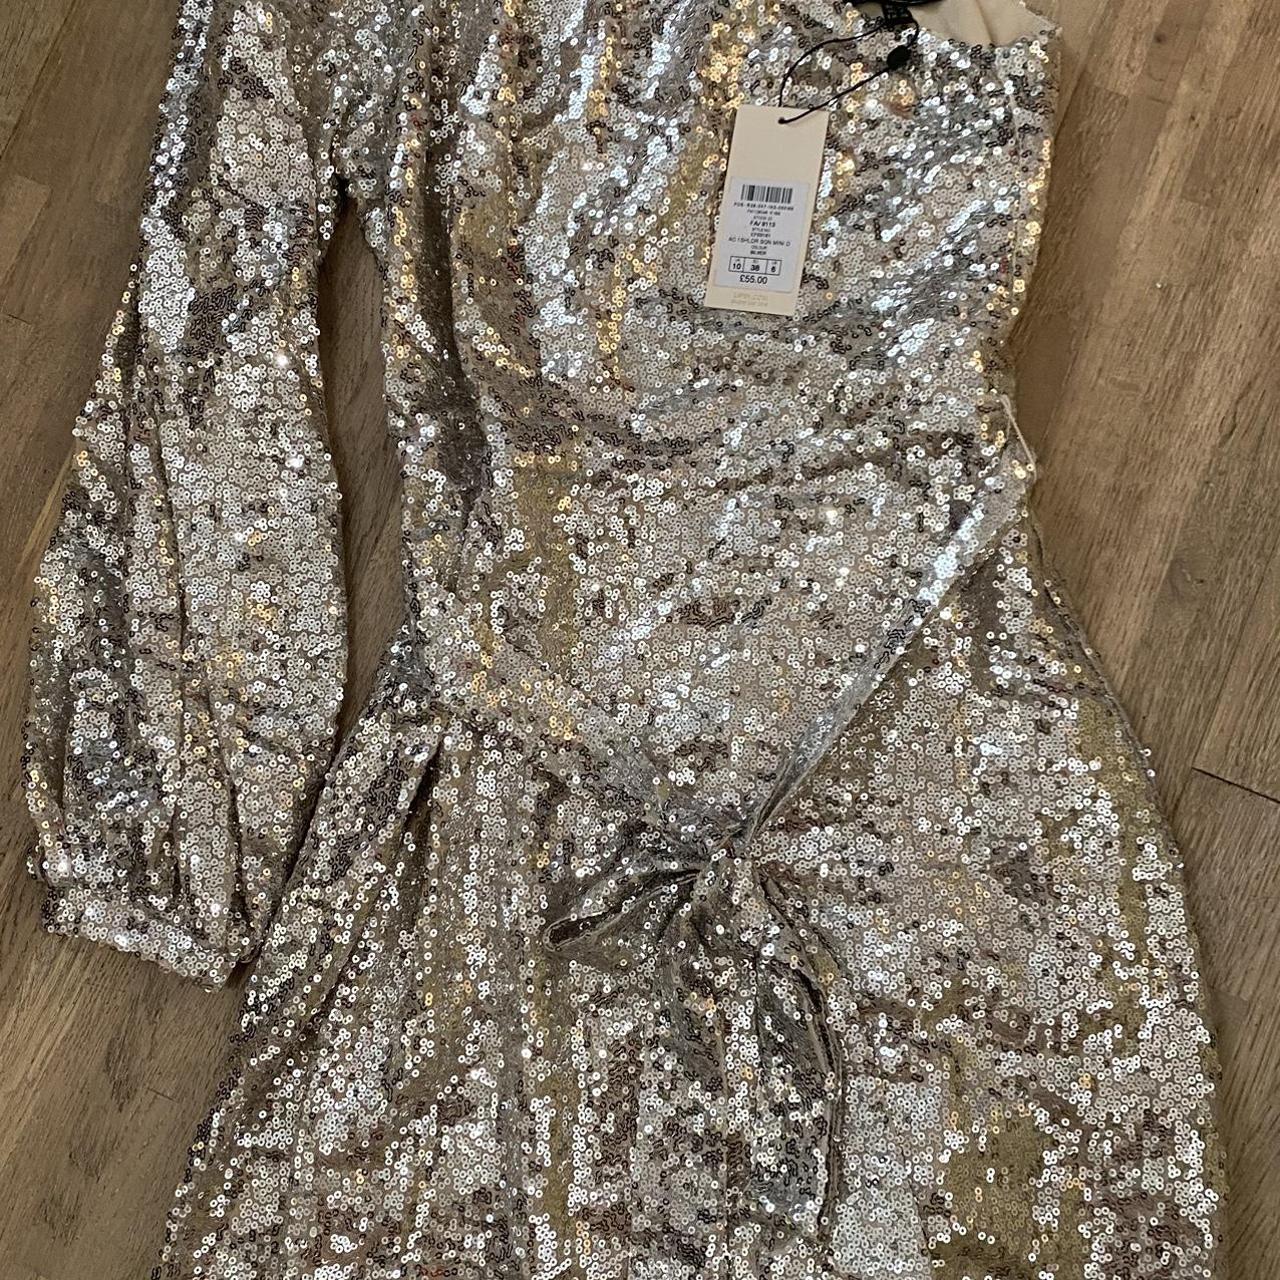 Brand new (with tag) gold sequin Lipsy dress size 10 - Depop